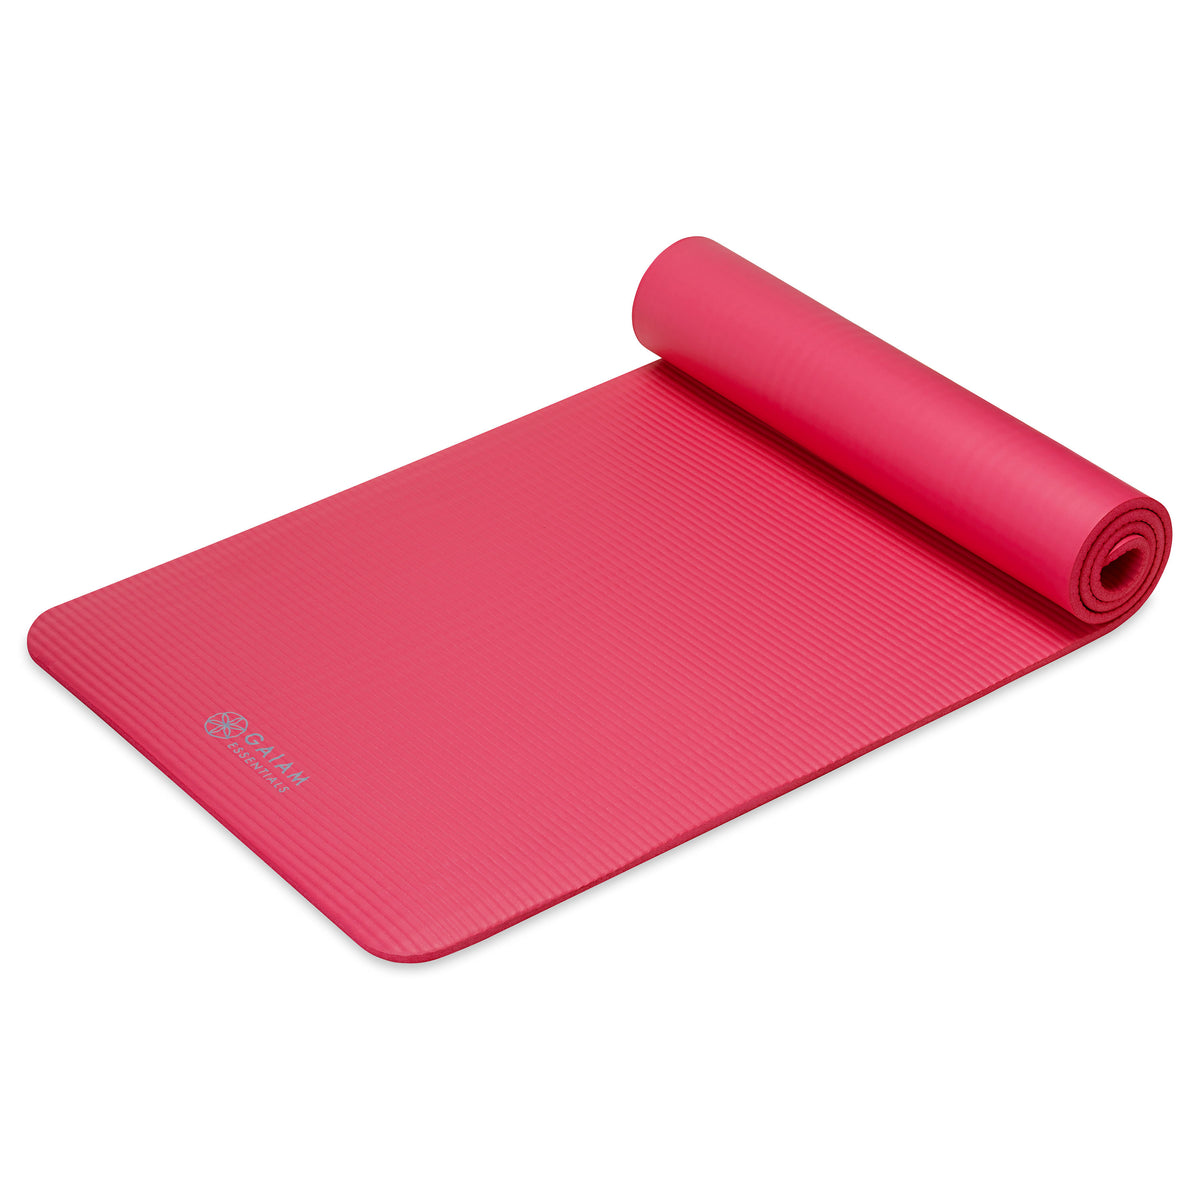 .Yoga and Exercise mat of12mm Pink Yoga Mat with Yoga Mat Carry Strap 100%  Eco Friendly